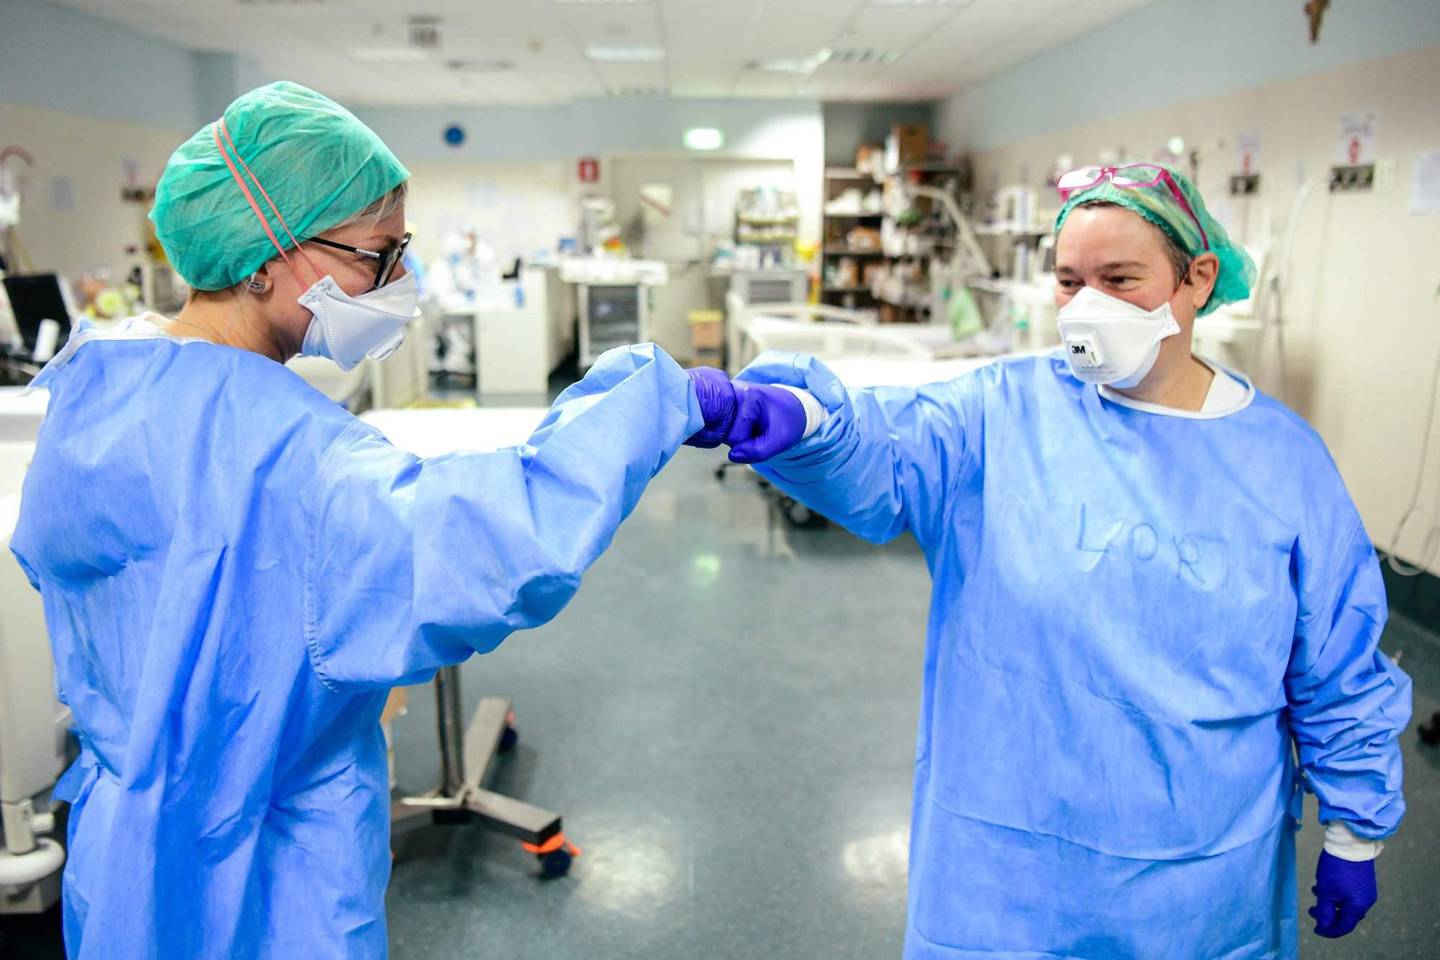 TOPSHOT - Members of the medical staff give themselves a fist bump while working at the intensive care unit (ICU) with the COVID-19 patients at the ASST Papa Giovanni XXIII hospital in Bergamo, on April 3, 2020. - Italy's three-week lockdown to stop the spread of COVID-19 has been extended through at least mid-April and its economy is expected to suffer its biggest peacetime shock since World War II. (Photo by Piero CRUCIATTI / AFP)